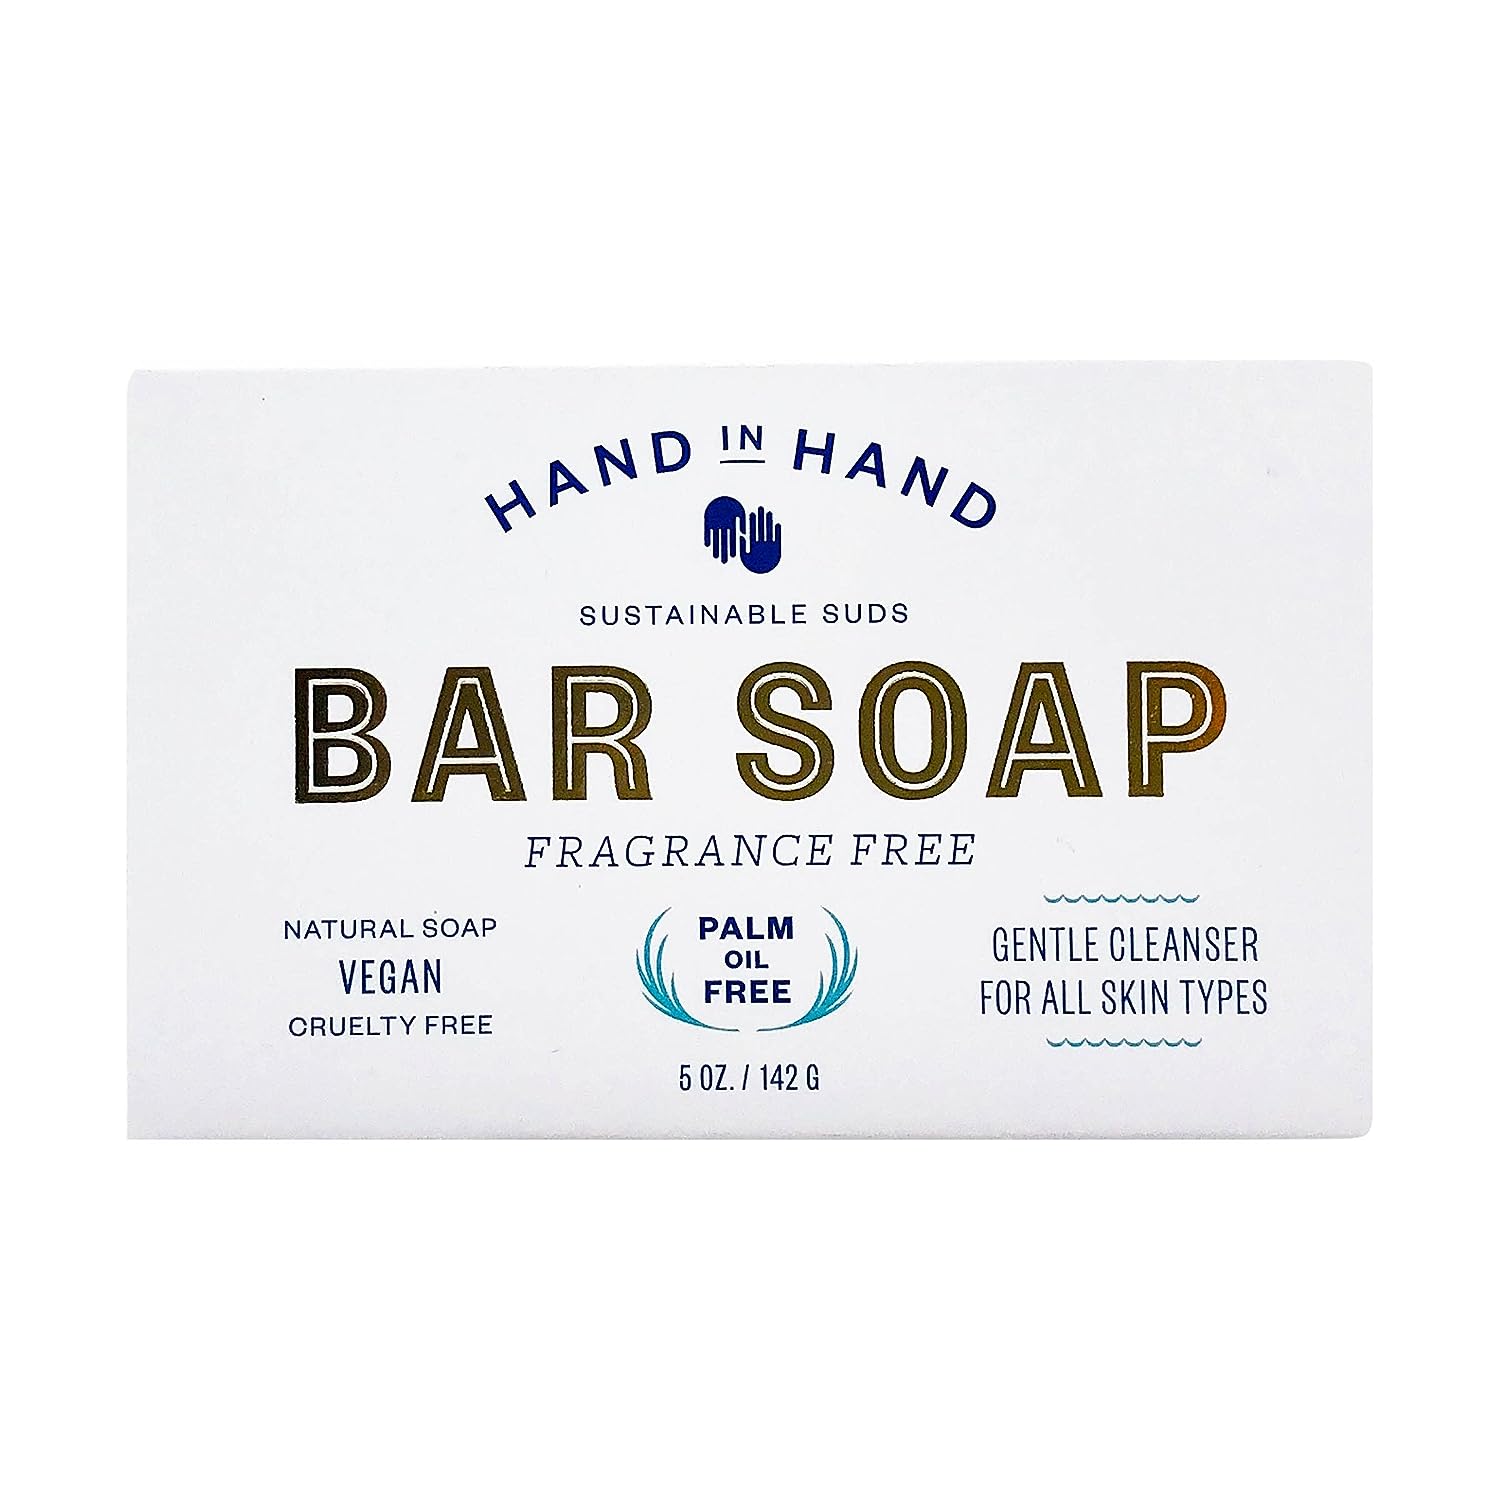 HAND IN HAND SOAP Fragrance Free Bar Soap, 5